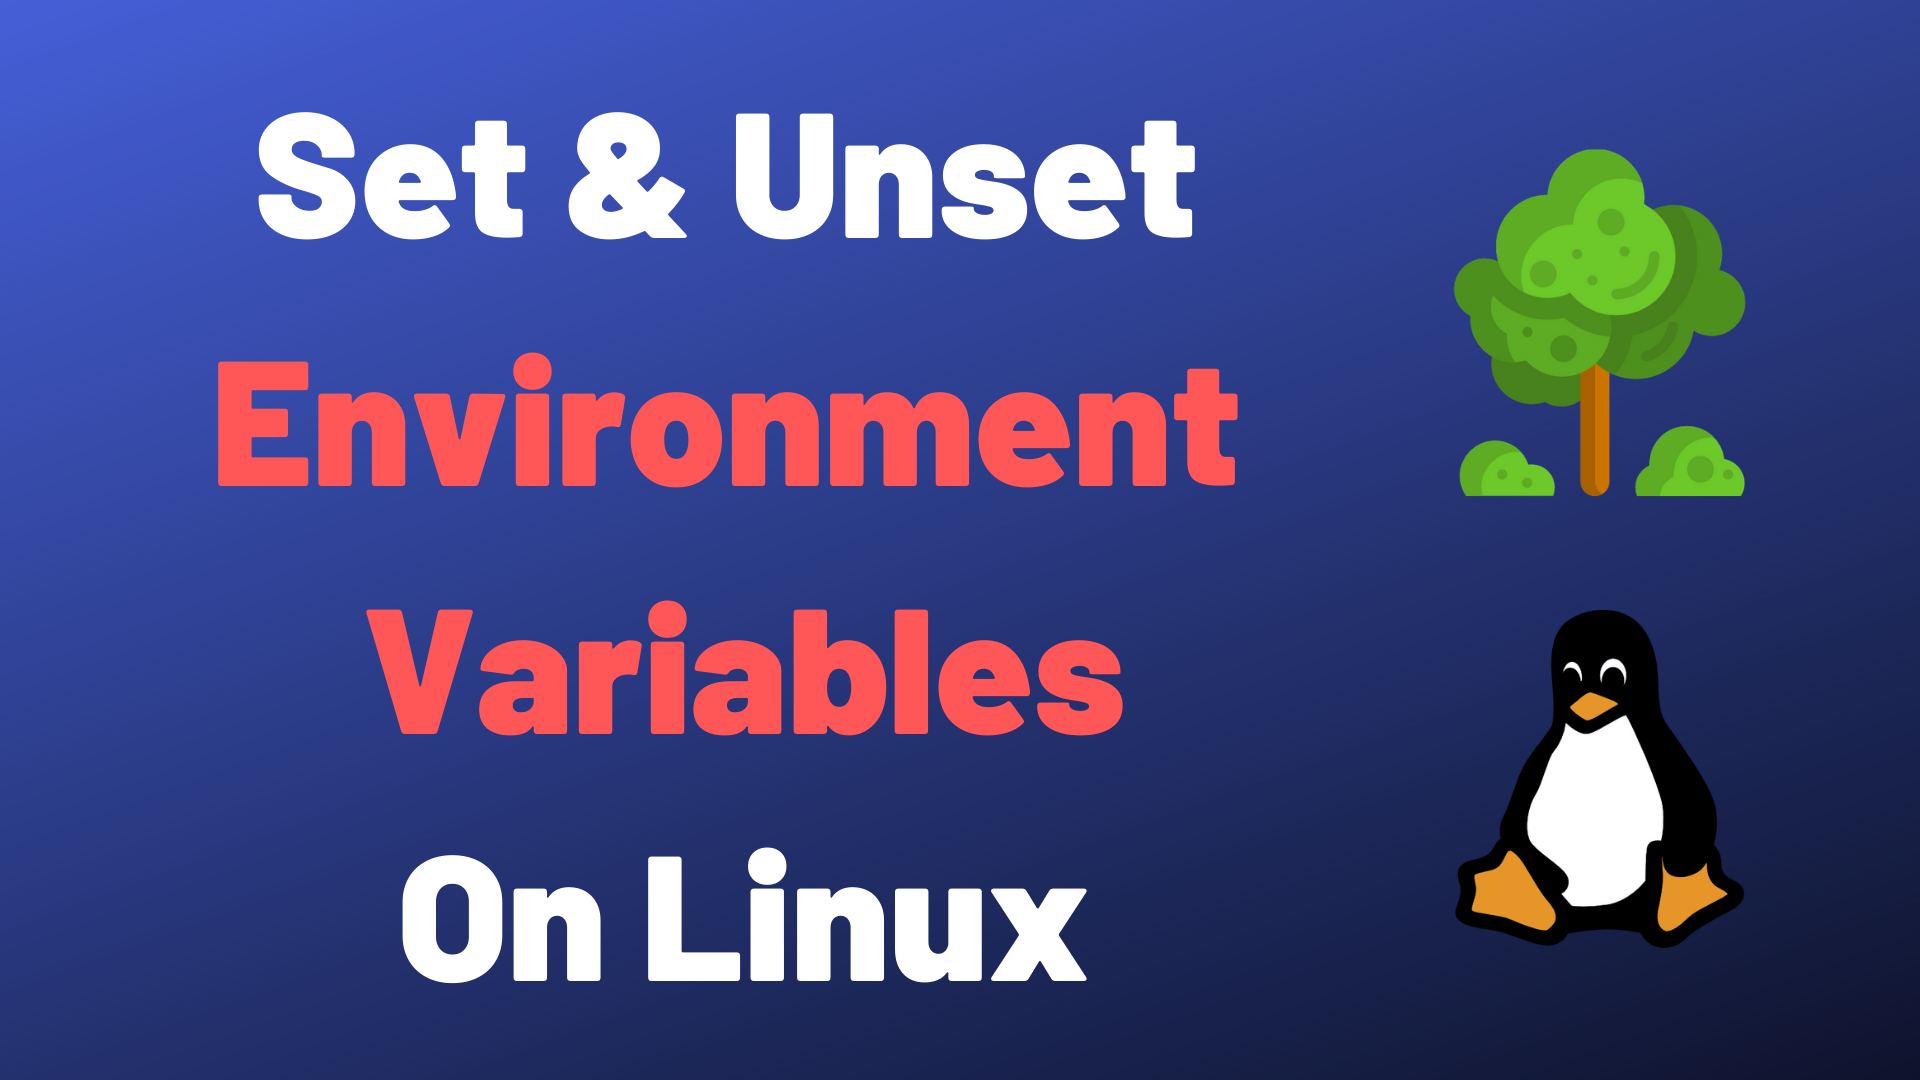 How To Set and Unset Environment Variables on Linux